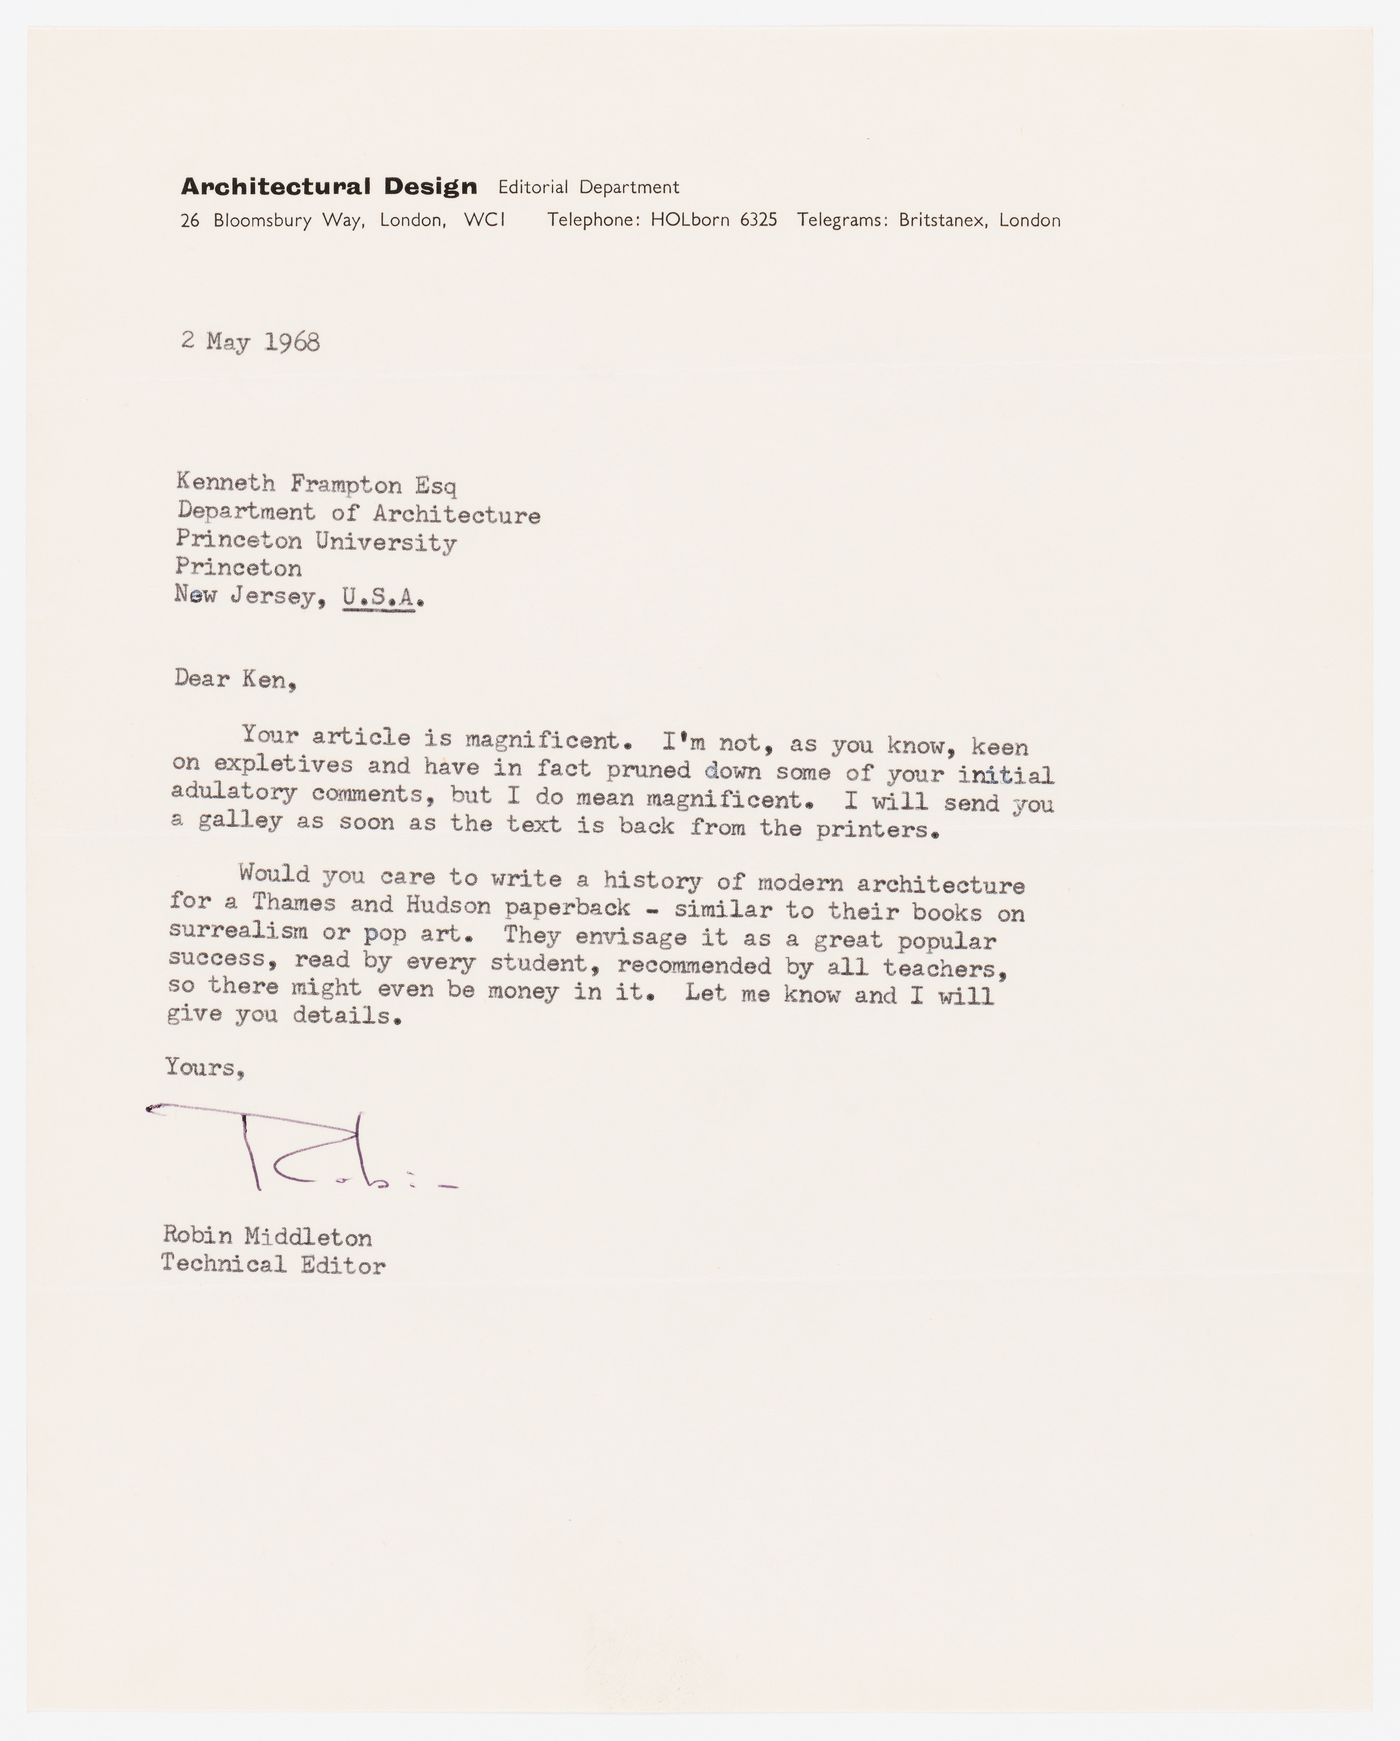 Letter from Robin Middleton to Kenneth Frampton about writing a history of modern architecture